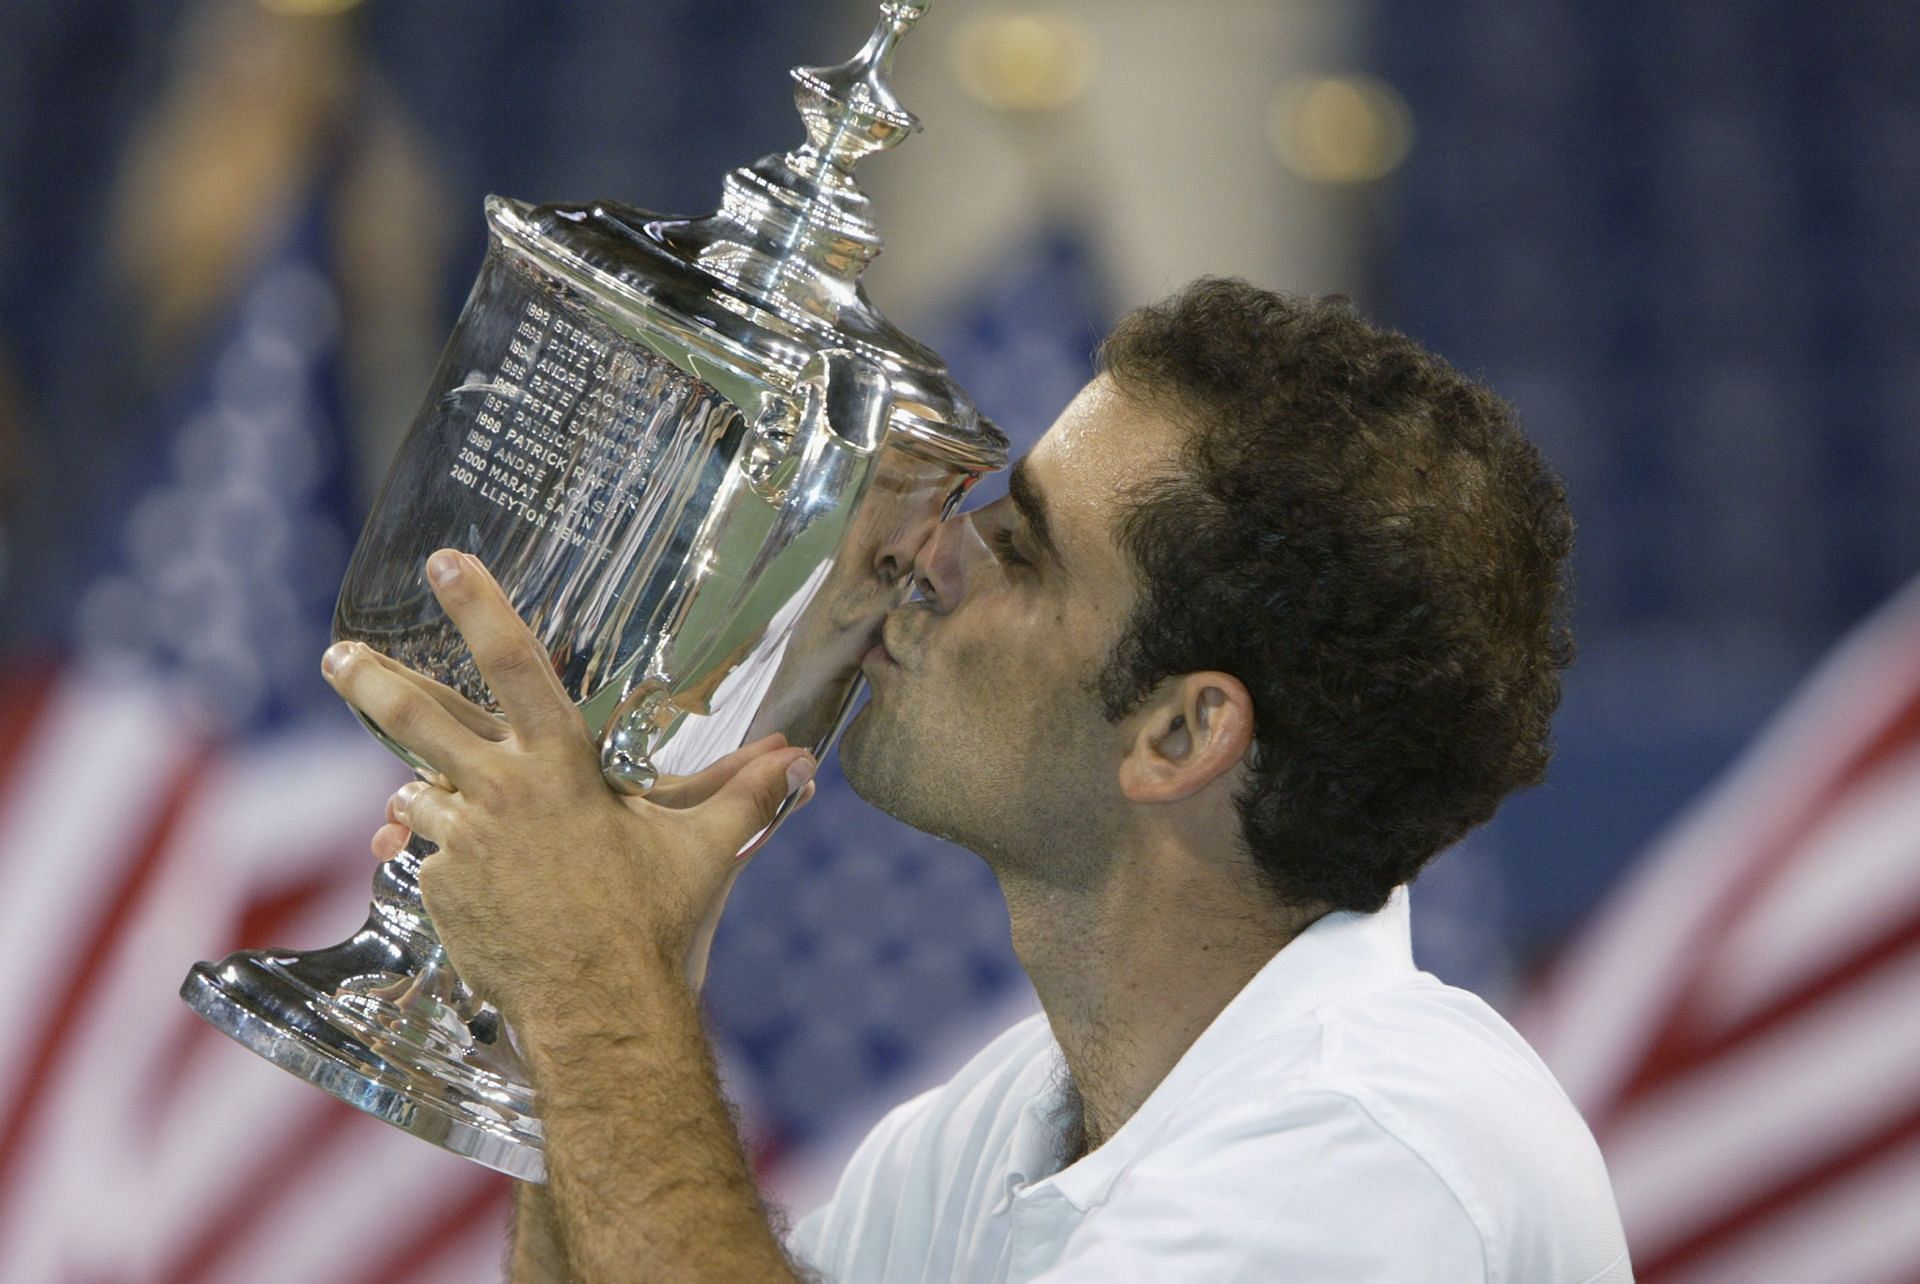 Pete Sampras scripted a fairy-tale win at the 2002 US Open.